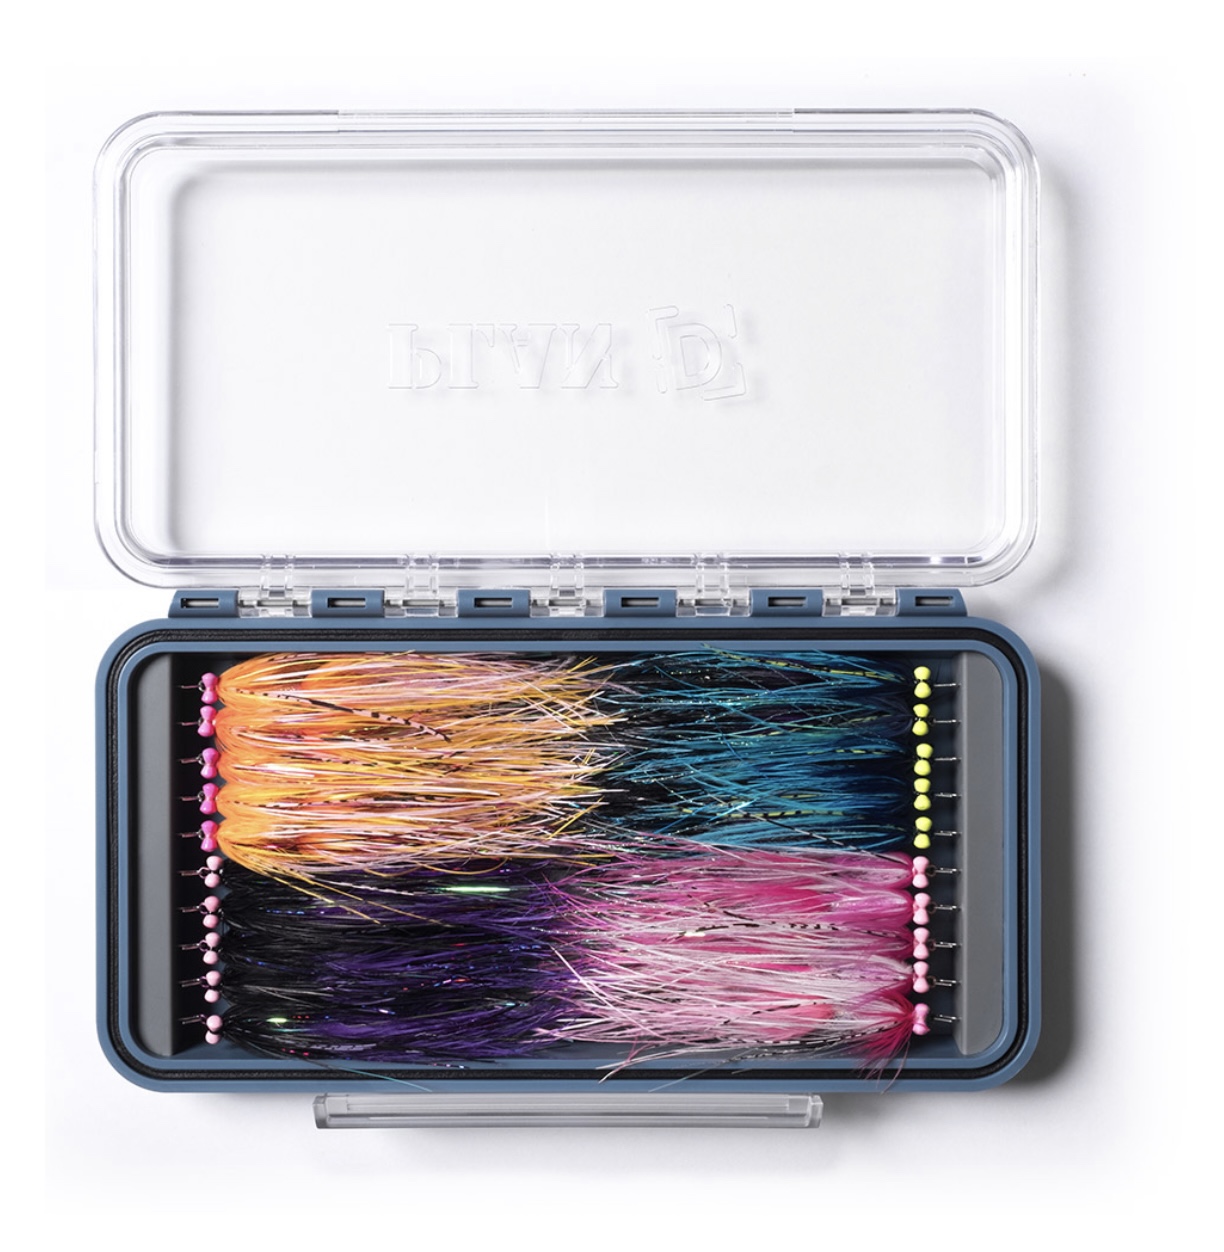 PLAN D Pack Articulated Plus Fly Box